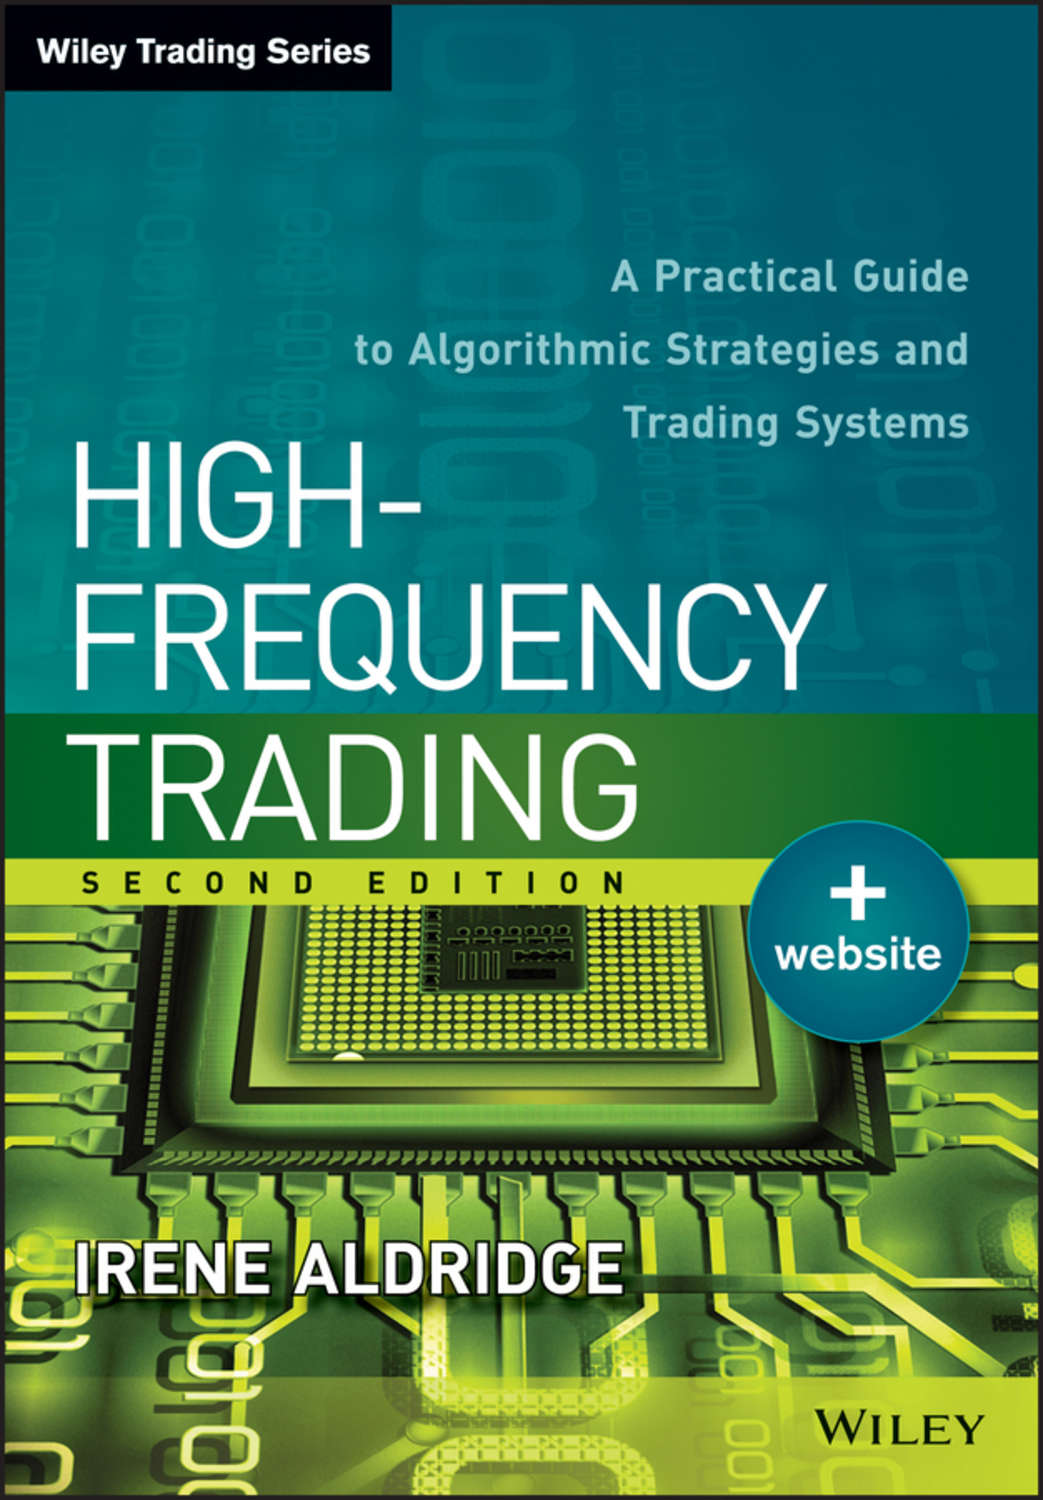 and　Trading.　на　Practical　–　Strategies　Guide　Algorithmic　to　Литрес　скачать　Systems»,　Trading　Irene　Aldridge　pdf　High-Frequency　A